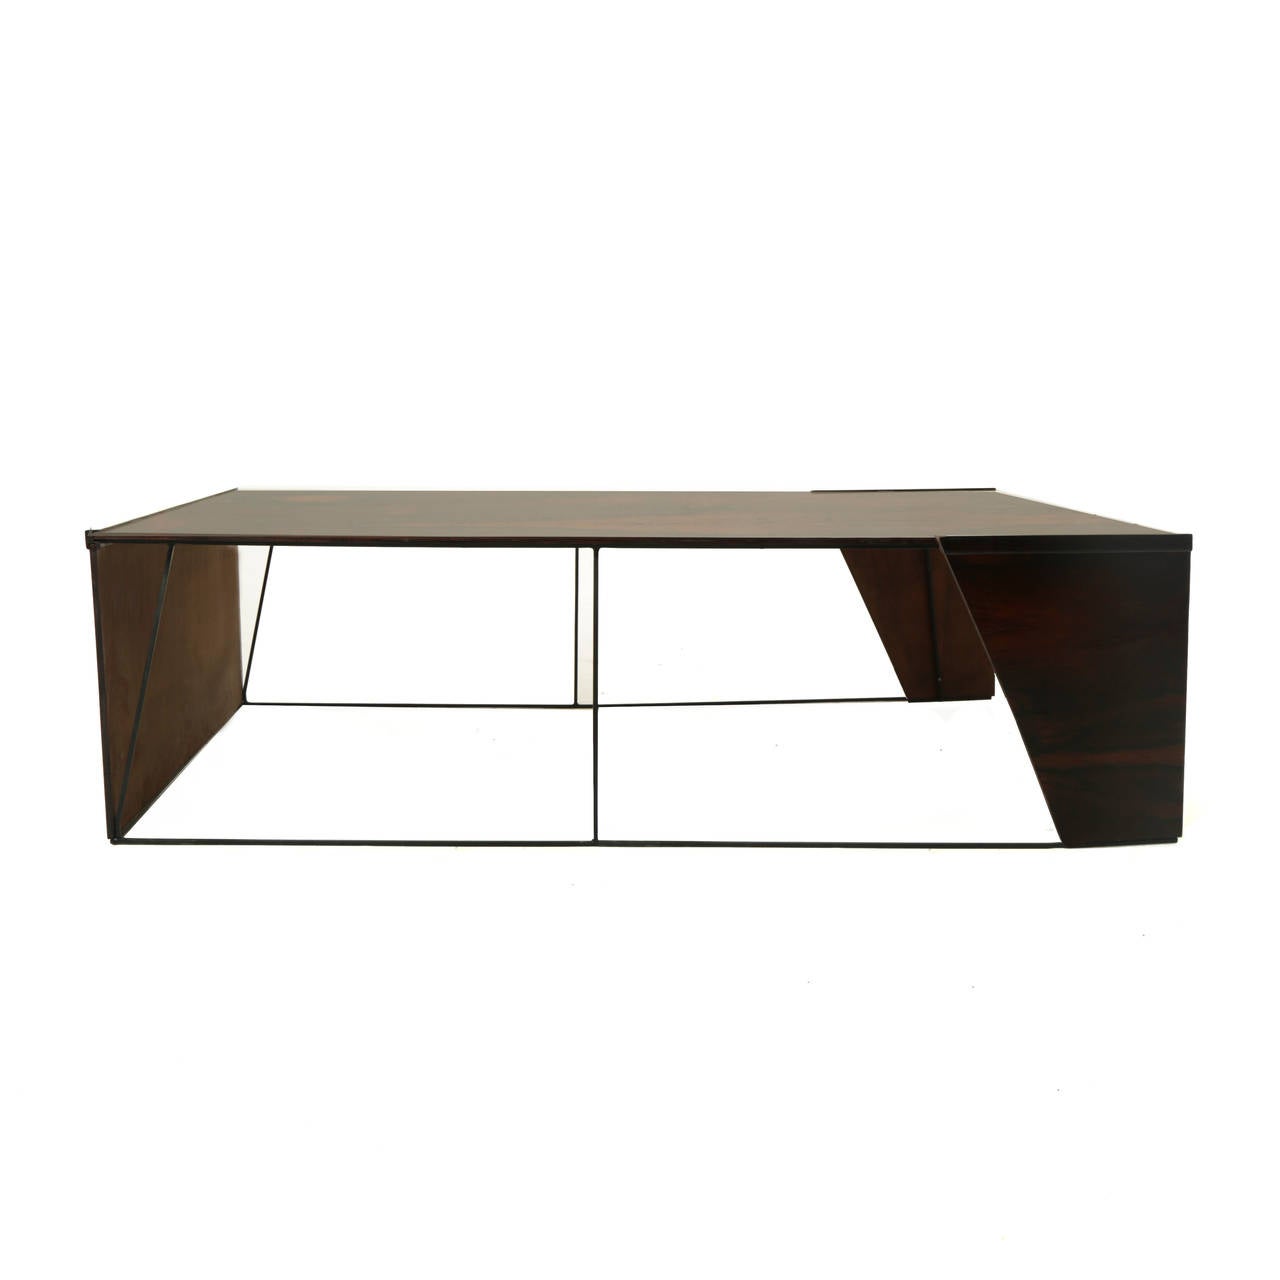 A large rectangular Rosewood coffee table from Brazil with metal stretchers. The top has open grains and figuration as the rosewood is textured as seen in pictures. The legs retain patina and grit from age, which has been hand oiled and cleaned and